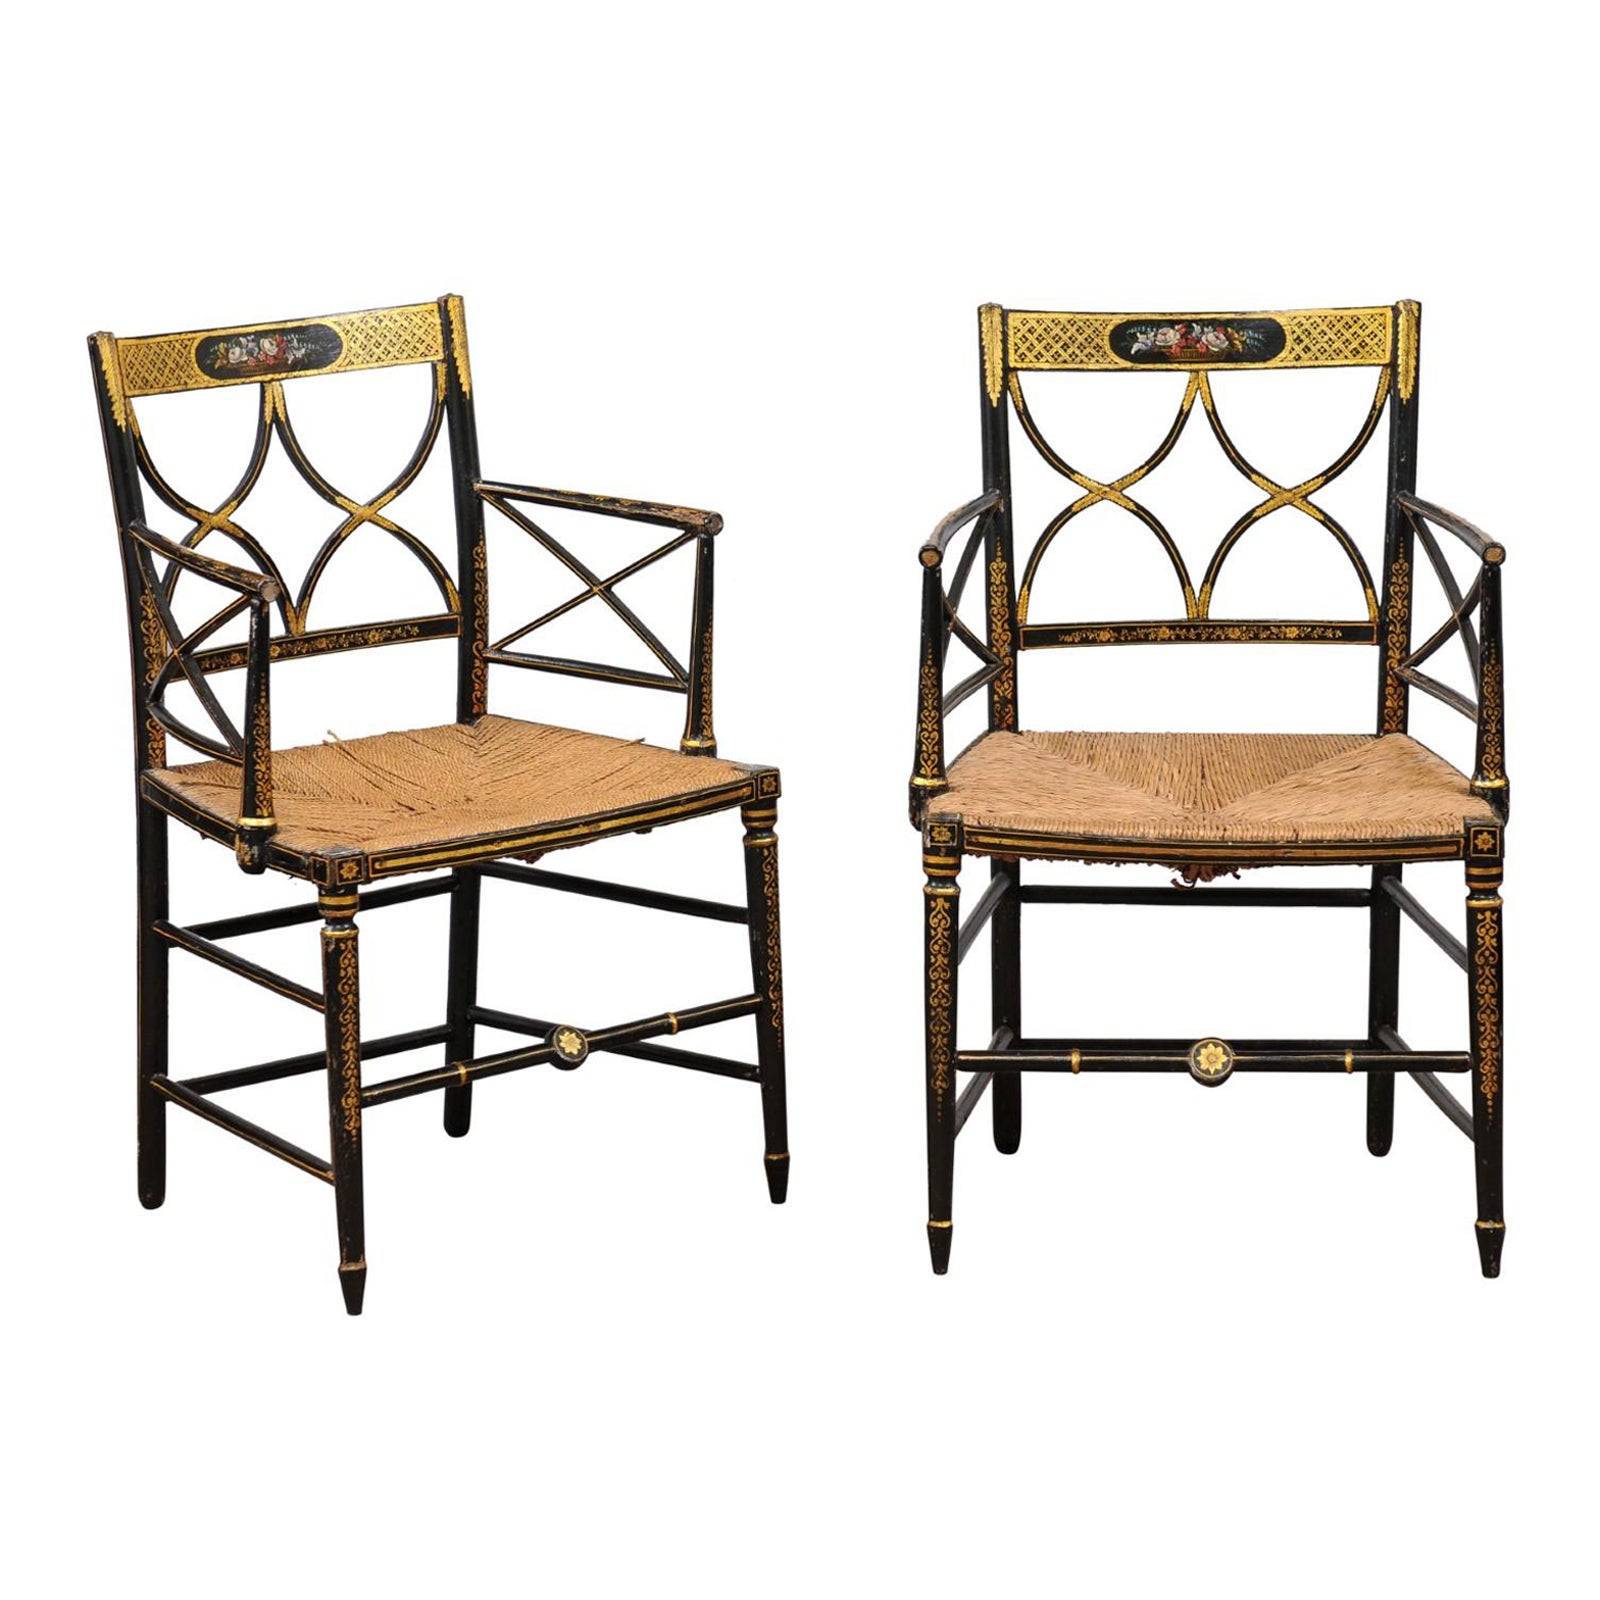  Pair of Regency Black Painted Arm Chairs with Floral Decoration & Rush Seats For Sale